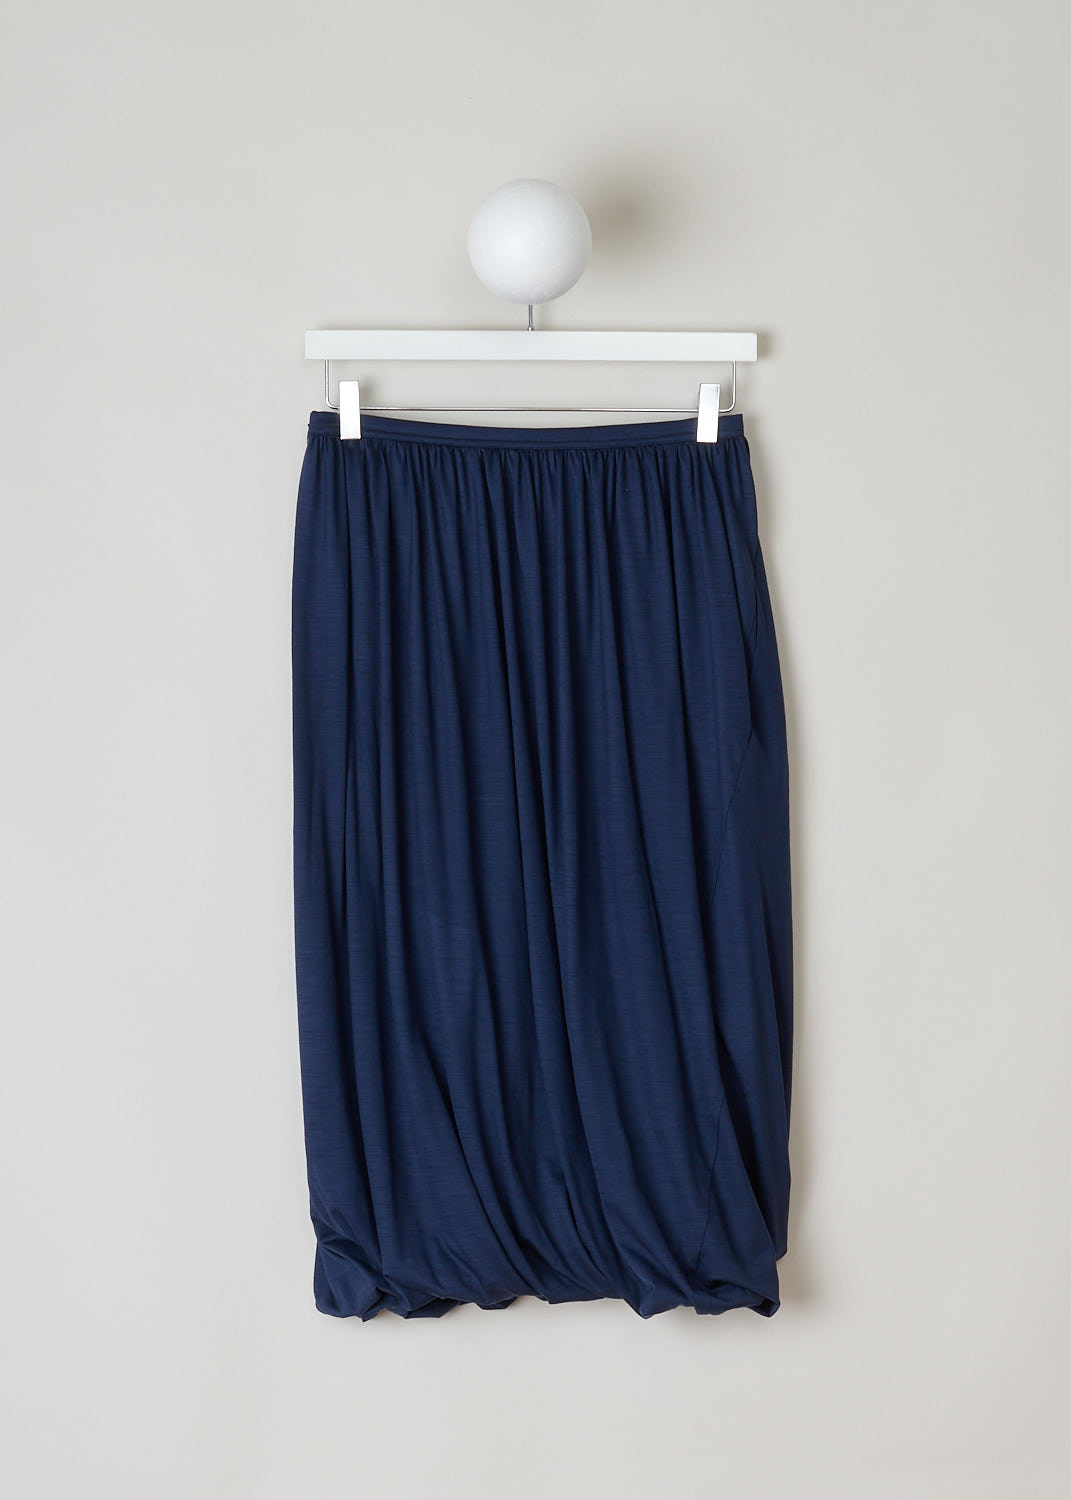 SOFIE Dâ€™HOORE, NAVY BLUE BALLOON SKIRT, SAOLA_WOJE_NAVY, Blue, Back, This twisted balloon skirt in navy blue features a concealed side zip. A single side pocket can be found concealed in the seam.
